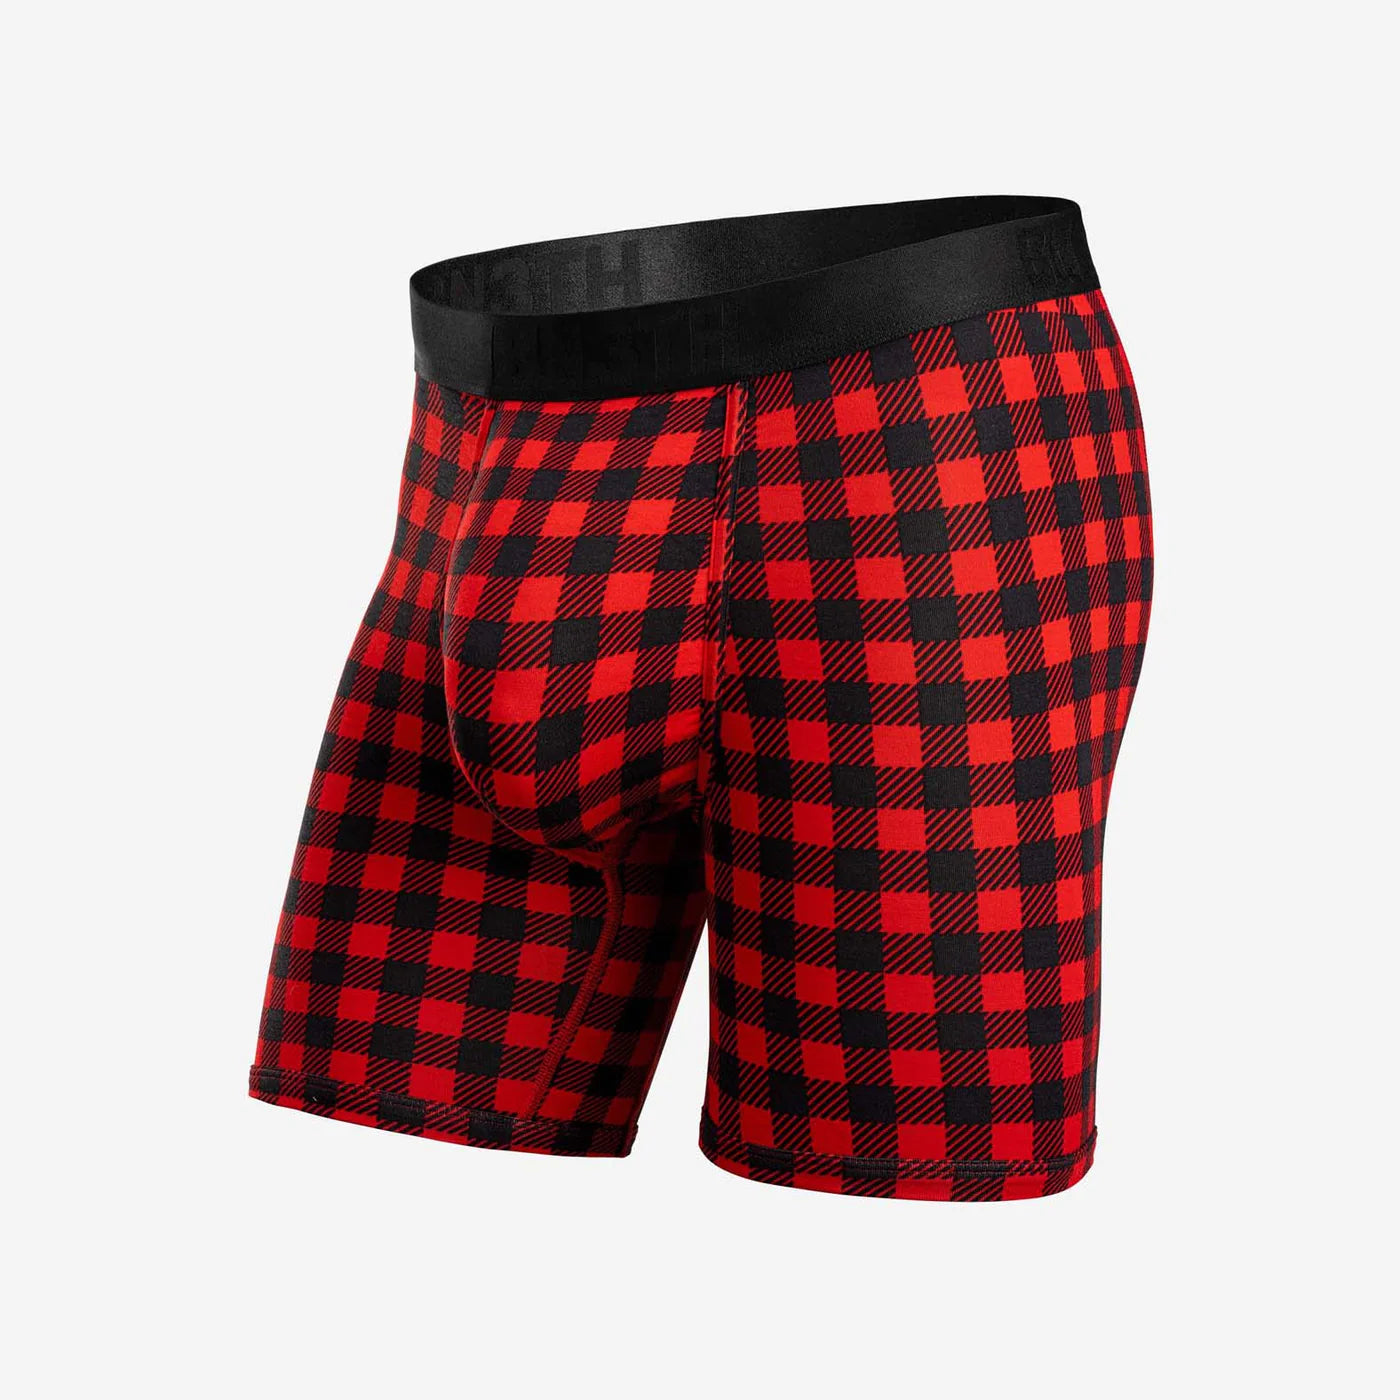 Classic Boxer Brief: Pine/Covert Camo 2 Pack